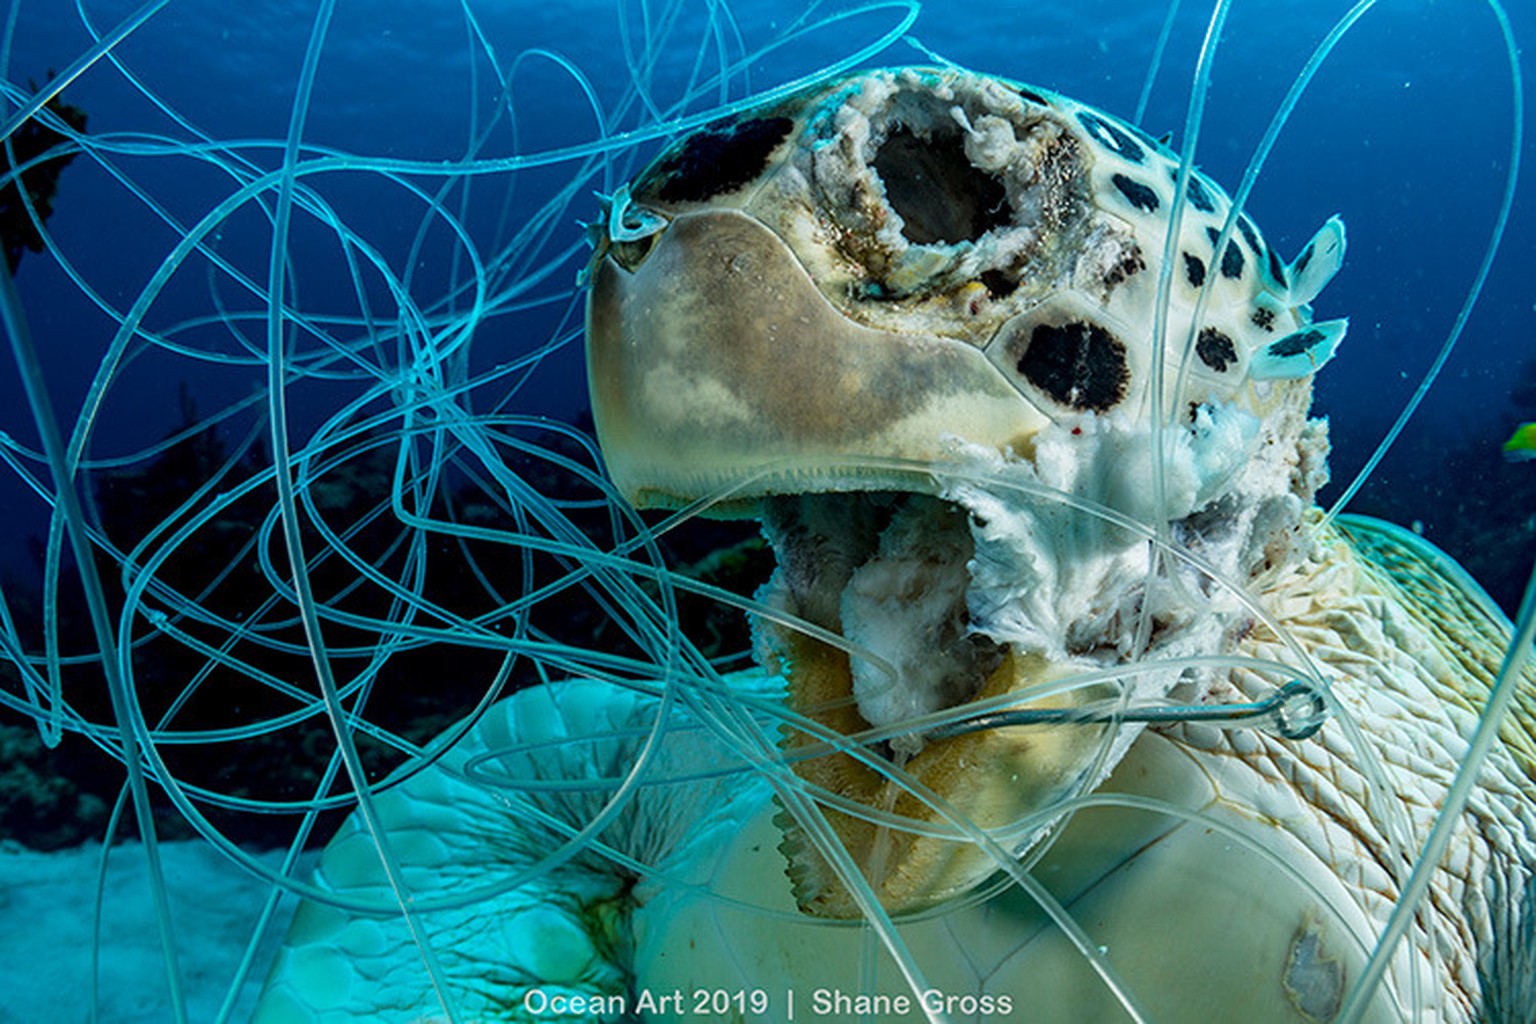 Dead green sea turtle (Chelonia mydas) hooked and tangled in fishing line as bycatch. Image made in The Bahamas.